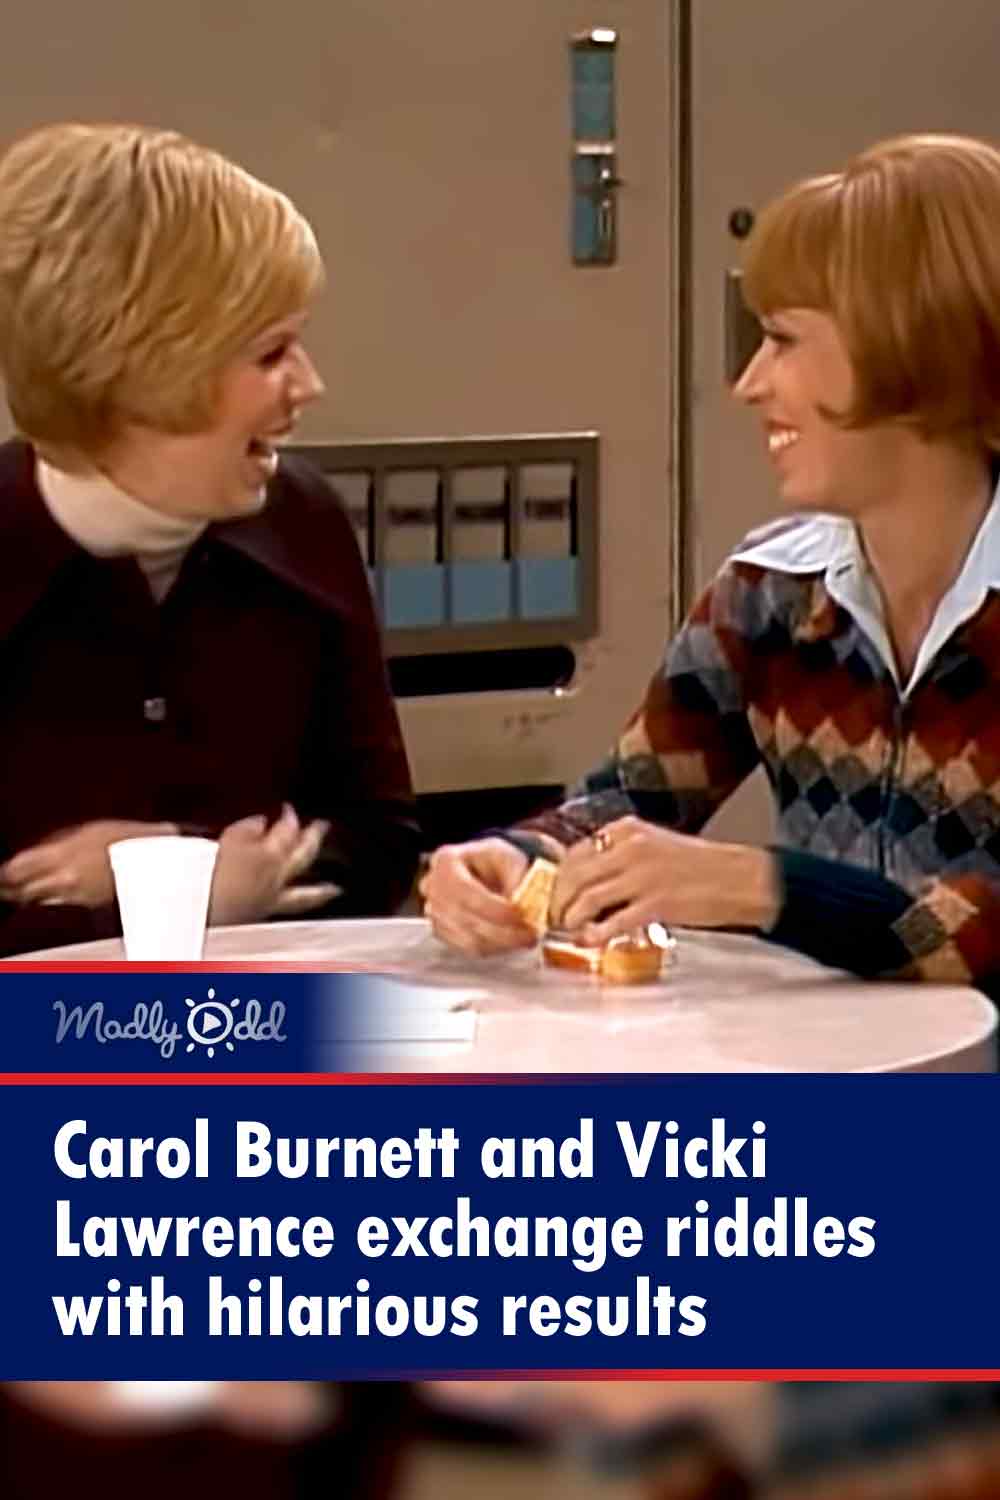 Carol Burnett and Vicki Lawrence exchange riddles with hilarious results